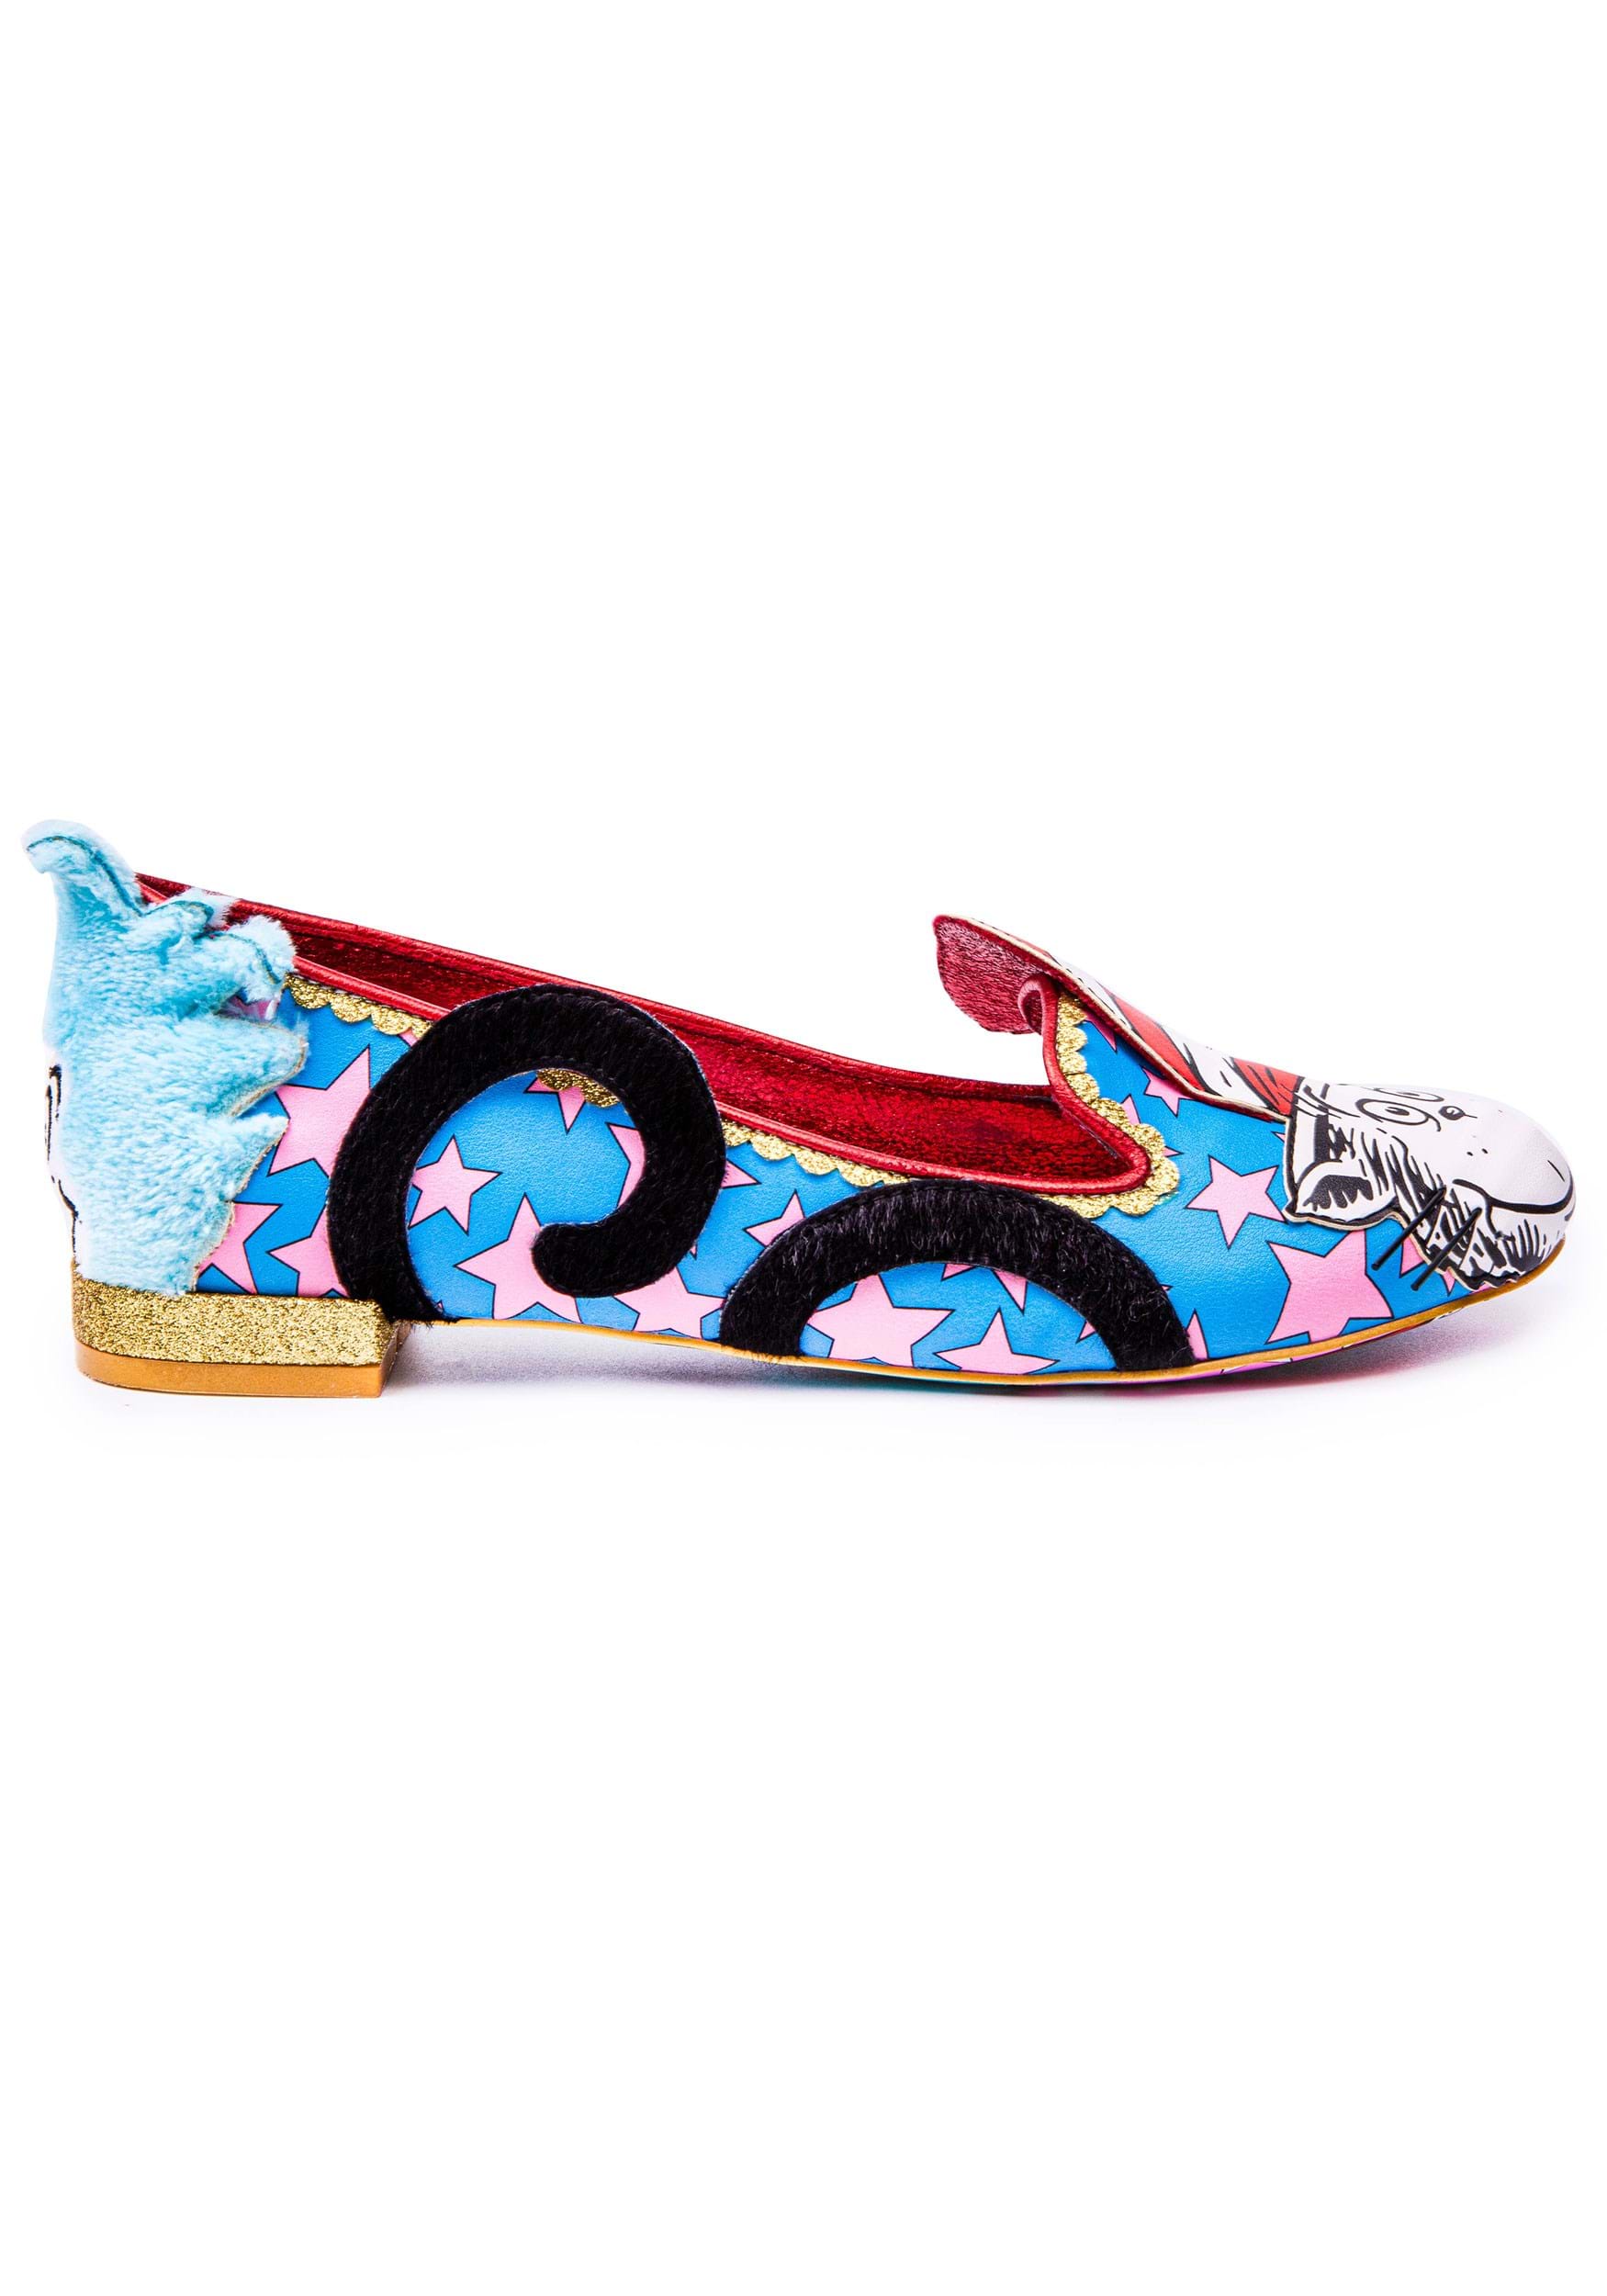 Irregular Choice Dr Seuss Cat in the Hat Flat Shoes